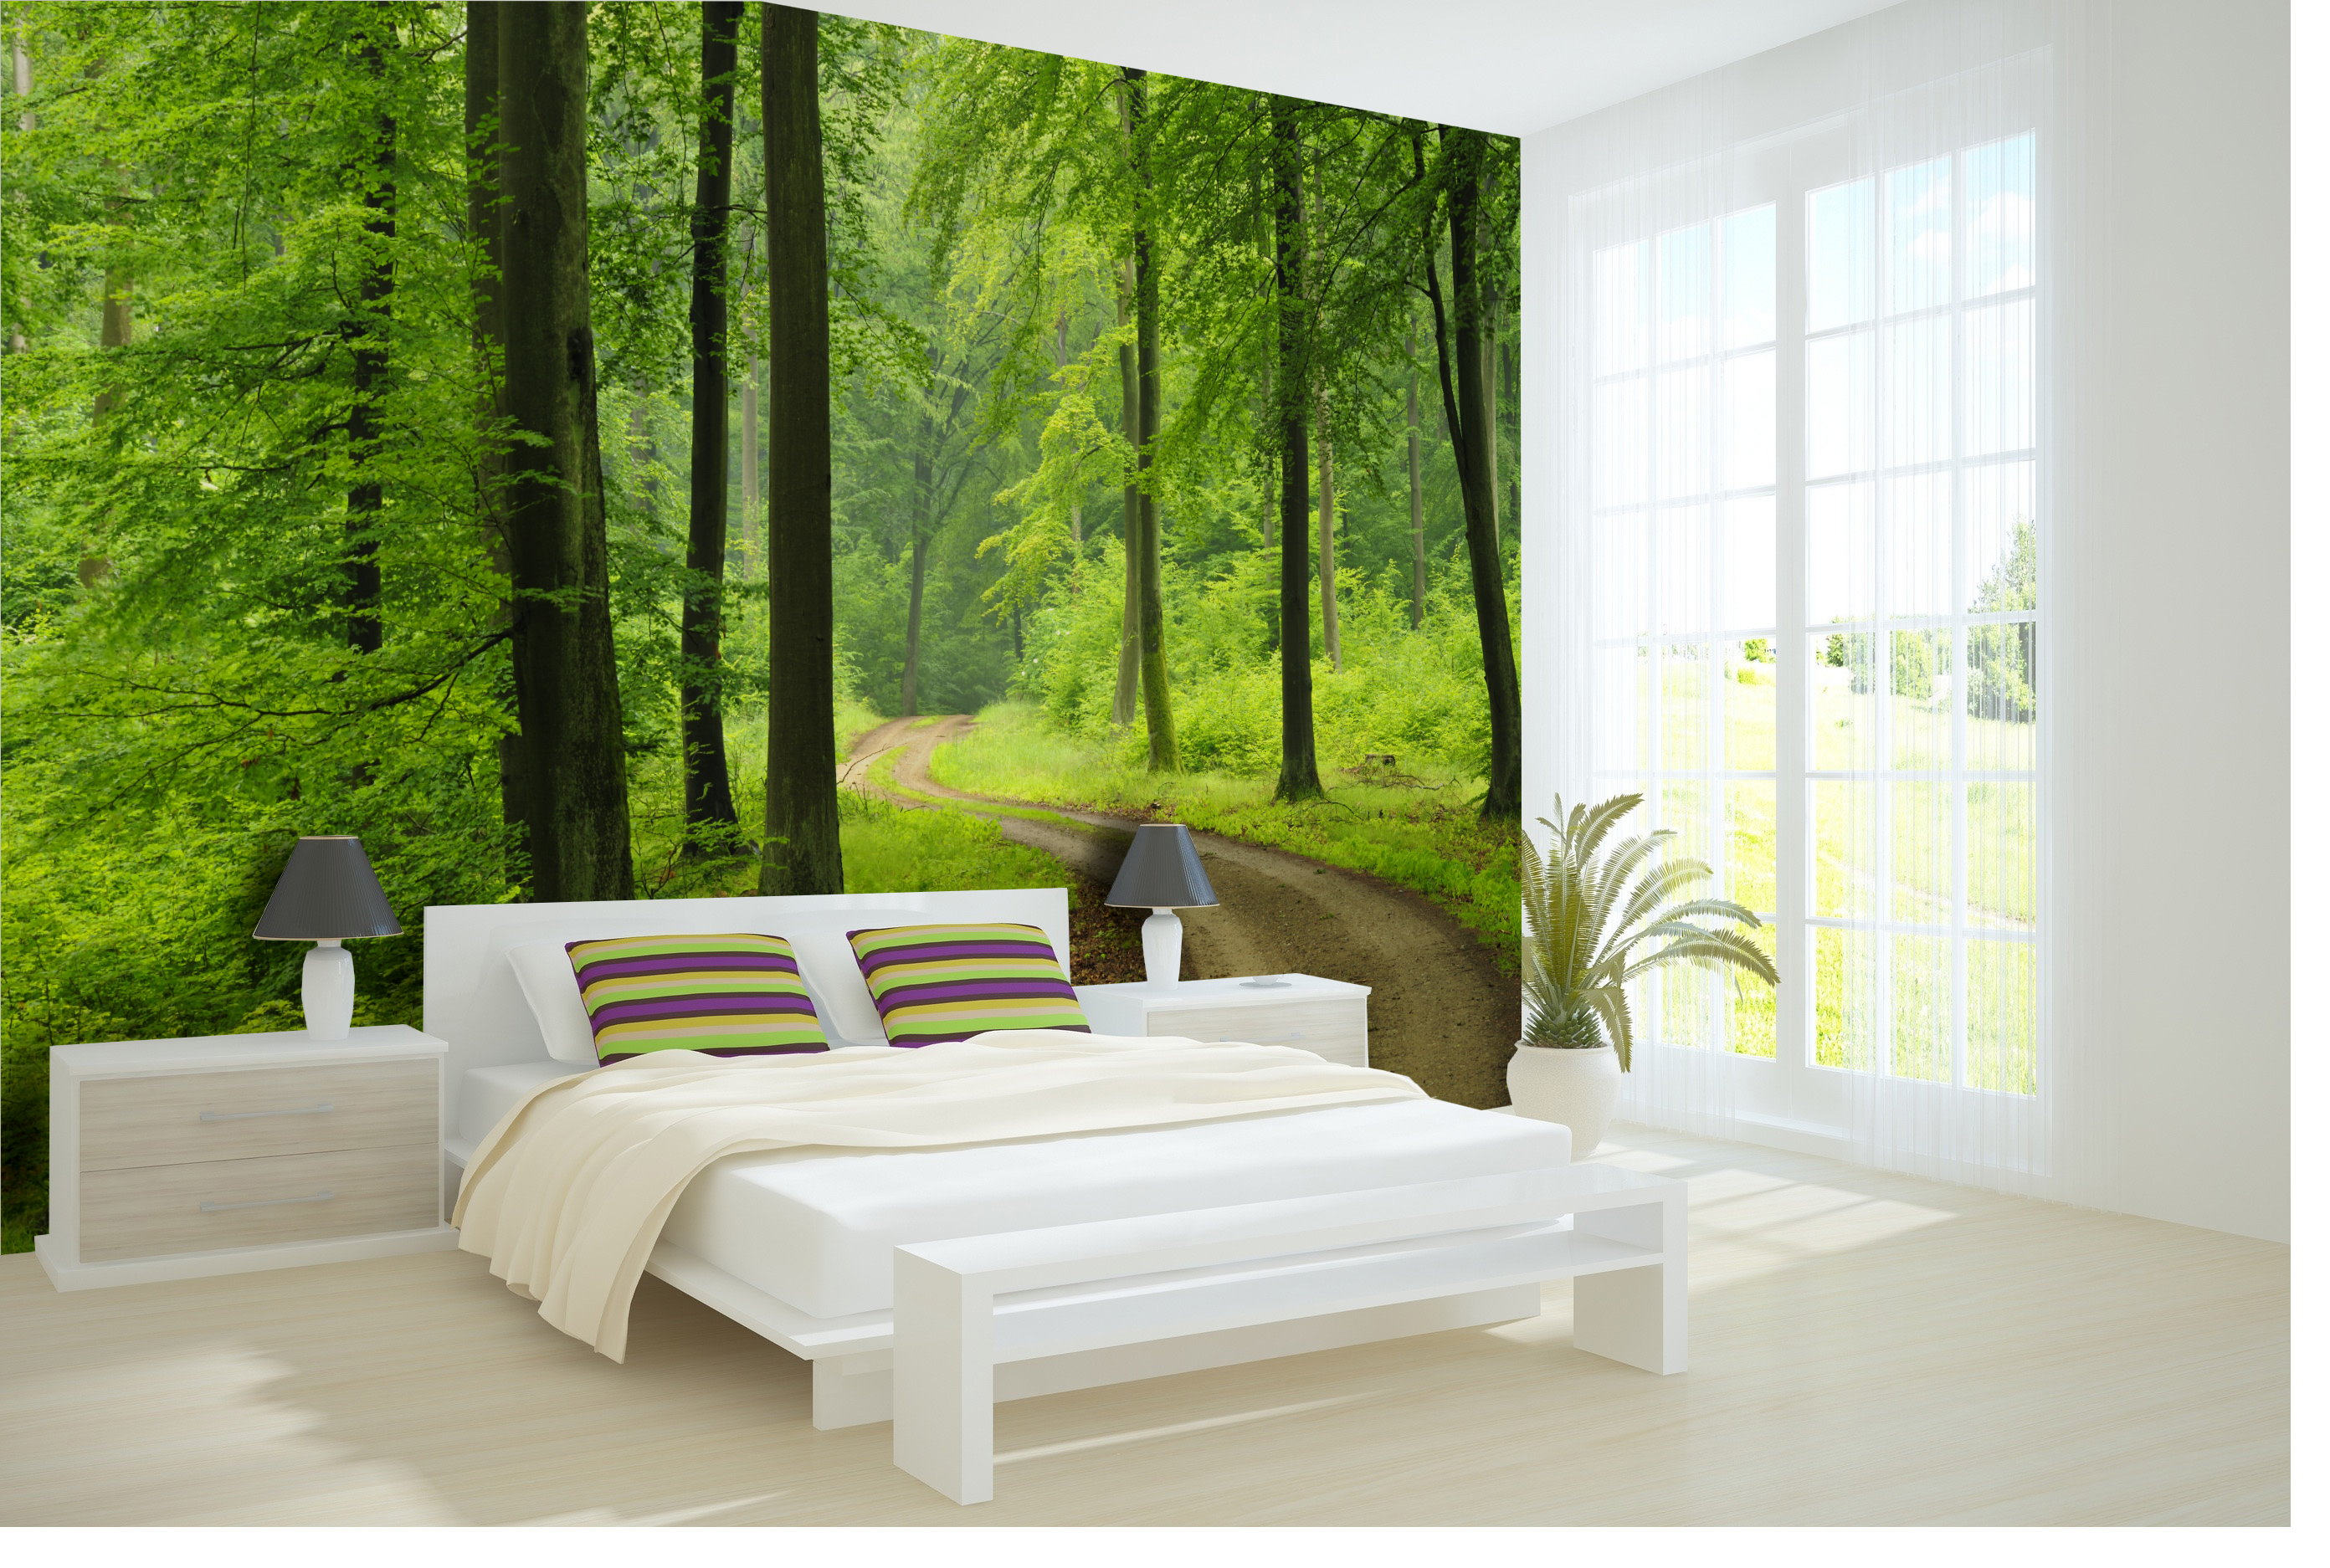 forest wallpaper for bedroom,furniture,room,bed,wall,wallpaper